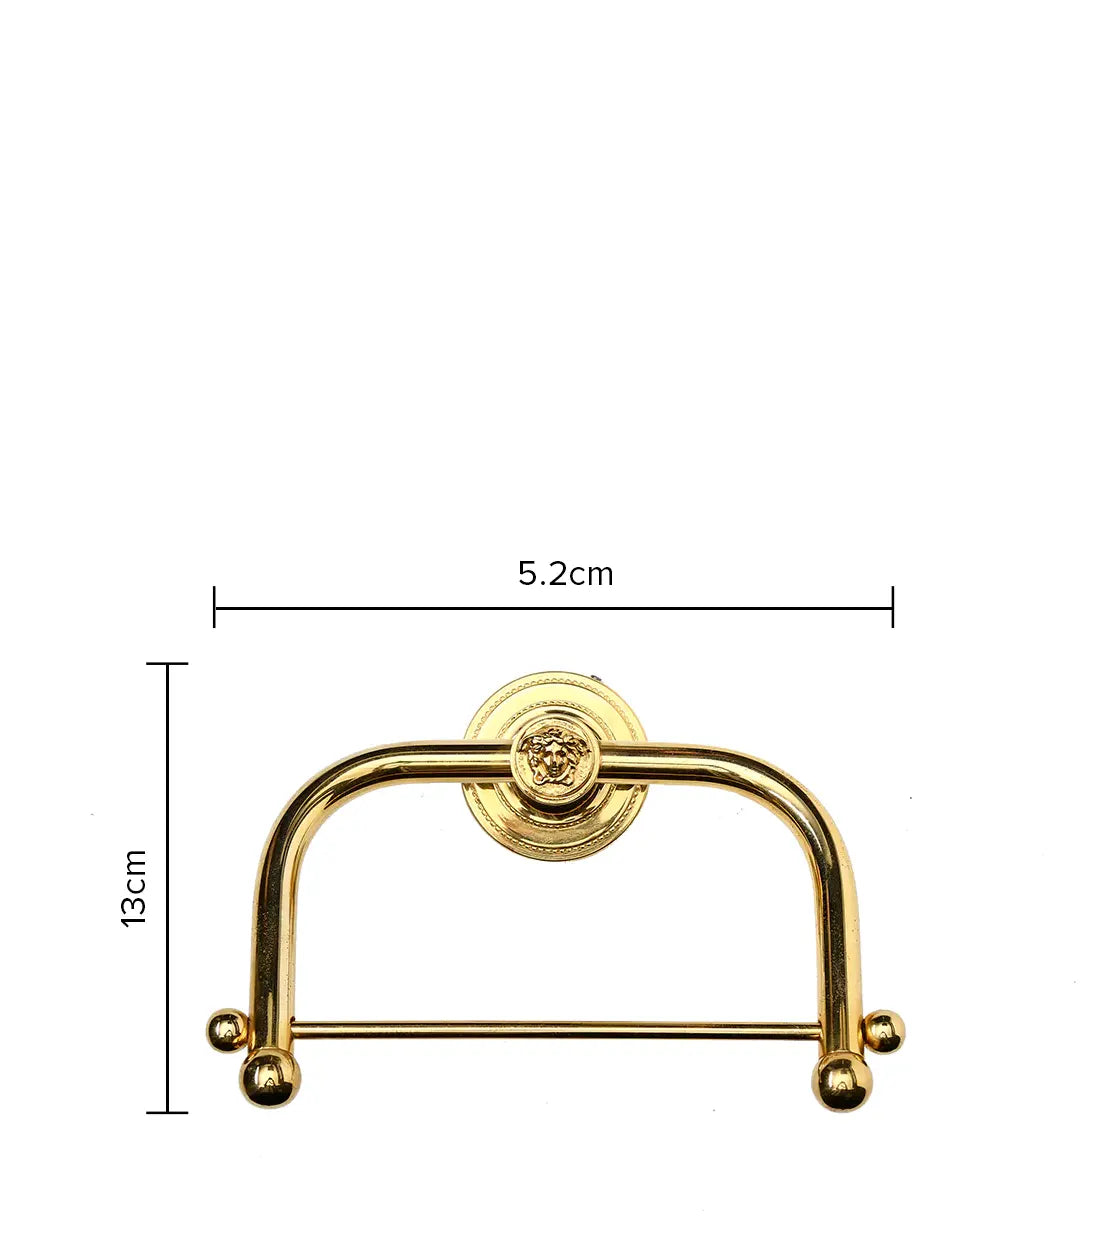 VERSACE - Golden Towel Holder - A striking accessory that combines functionality and style.